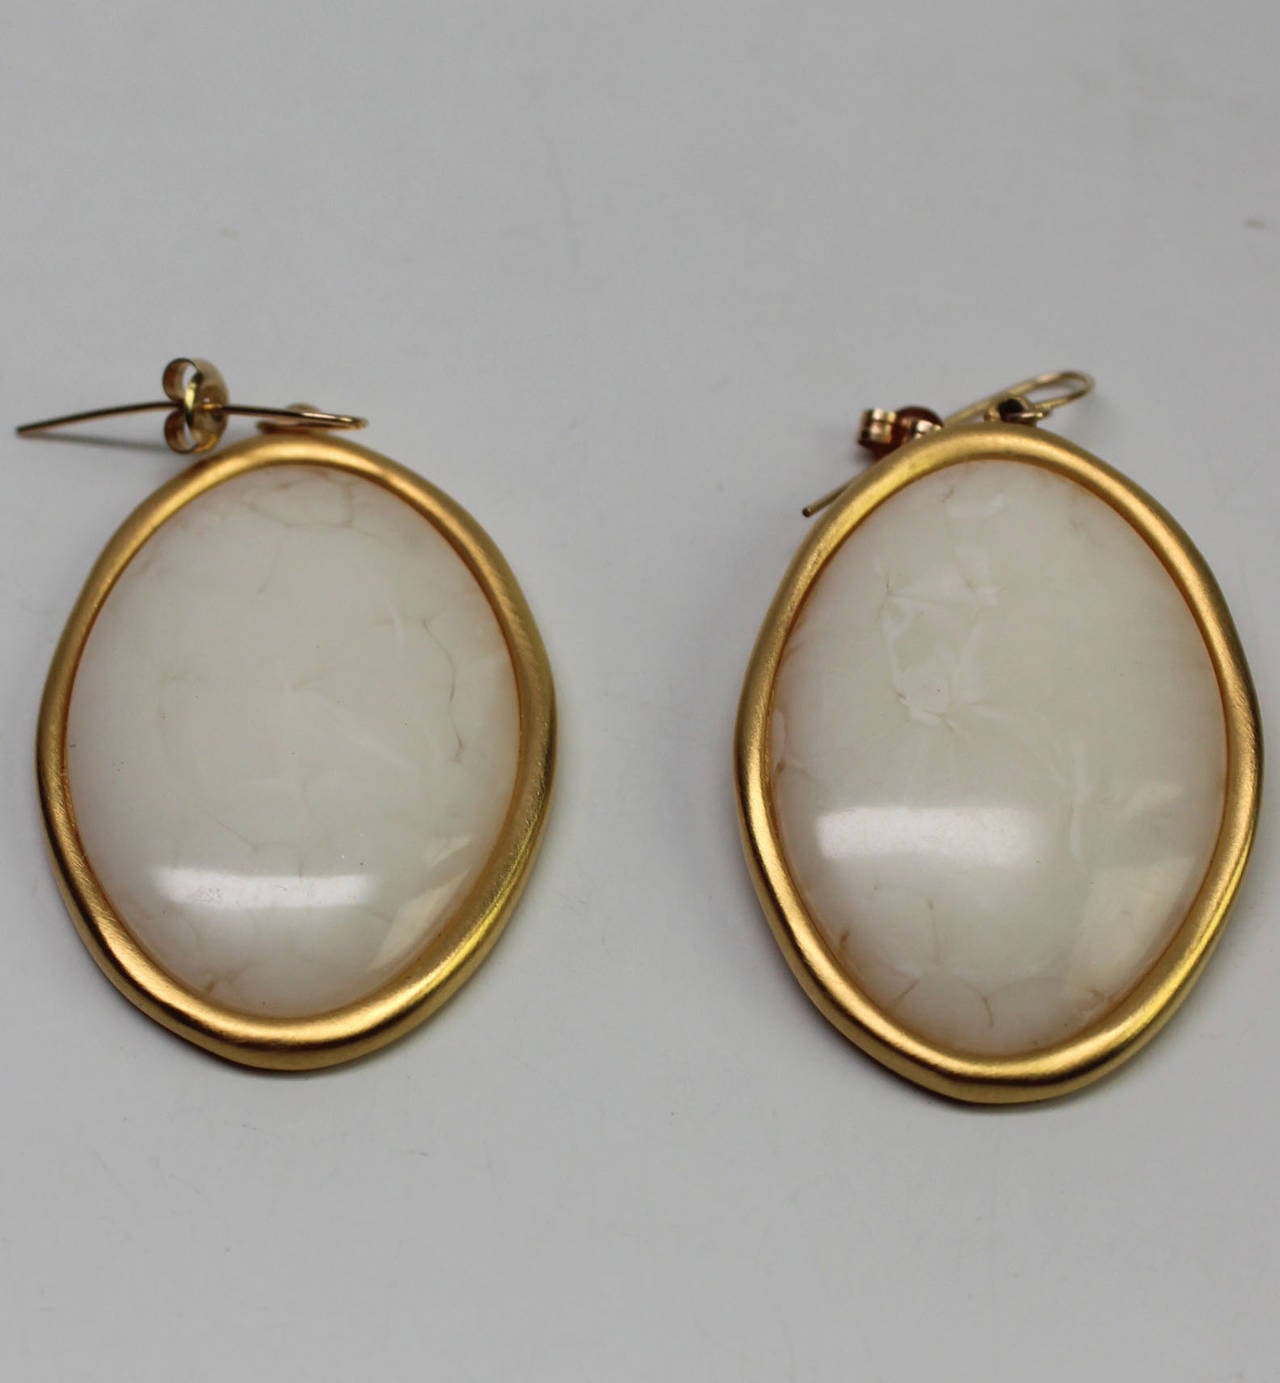 These stunning Givenchy earrings have a large opalescent stone in a gold frame hanging from a delicate wire post. These are the perfect summer earrings!